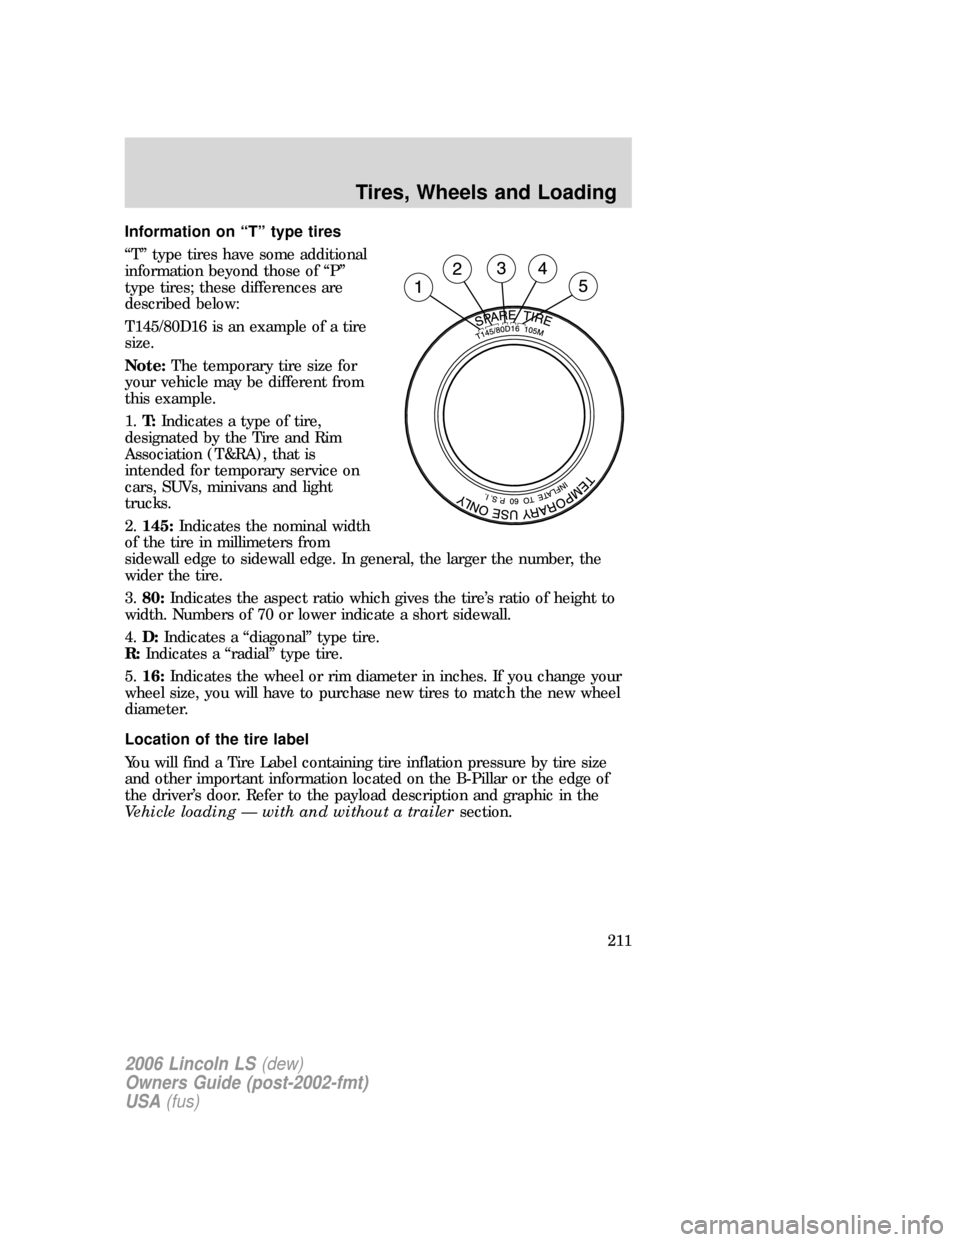 LINCOLN LS 2006  Owners Manual Information on “T” type tires
“T” type tires have some additional
information beyond those of “P”
type tires; these differences are
described below:
T145/80D16 is an example of a tire
size